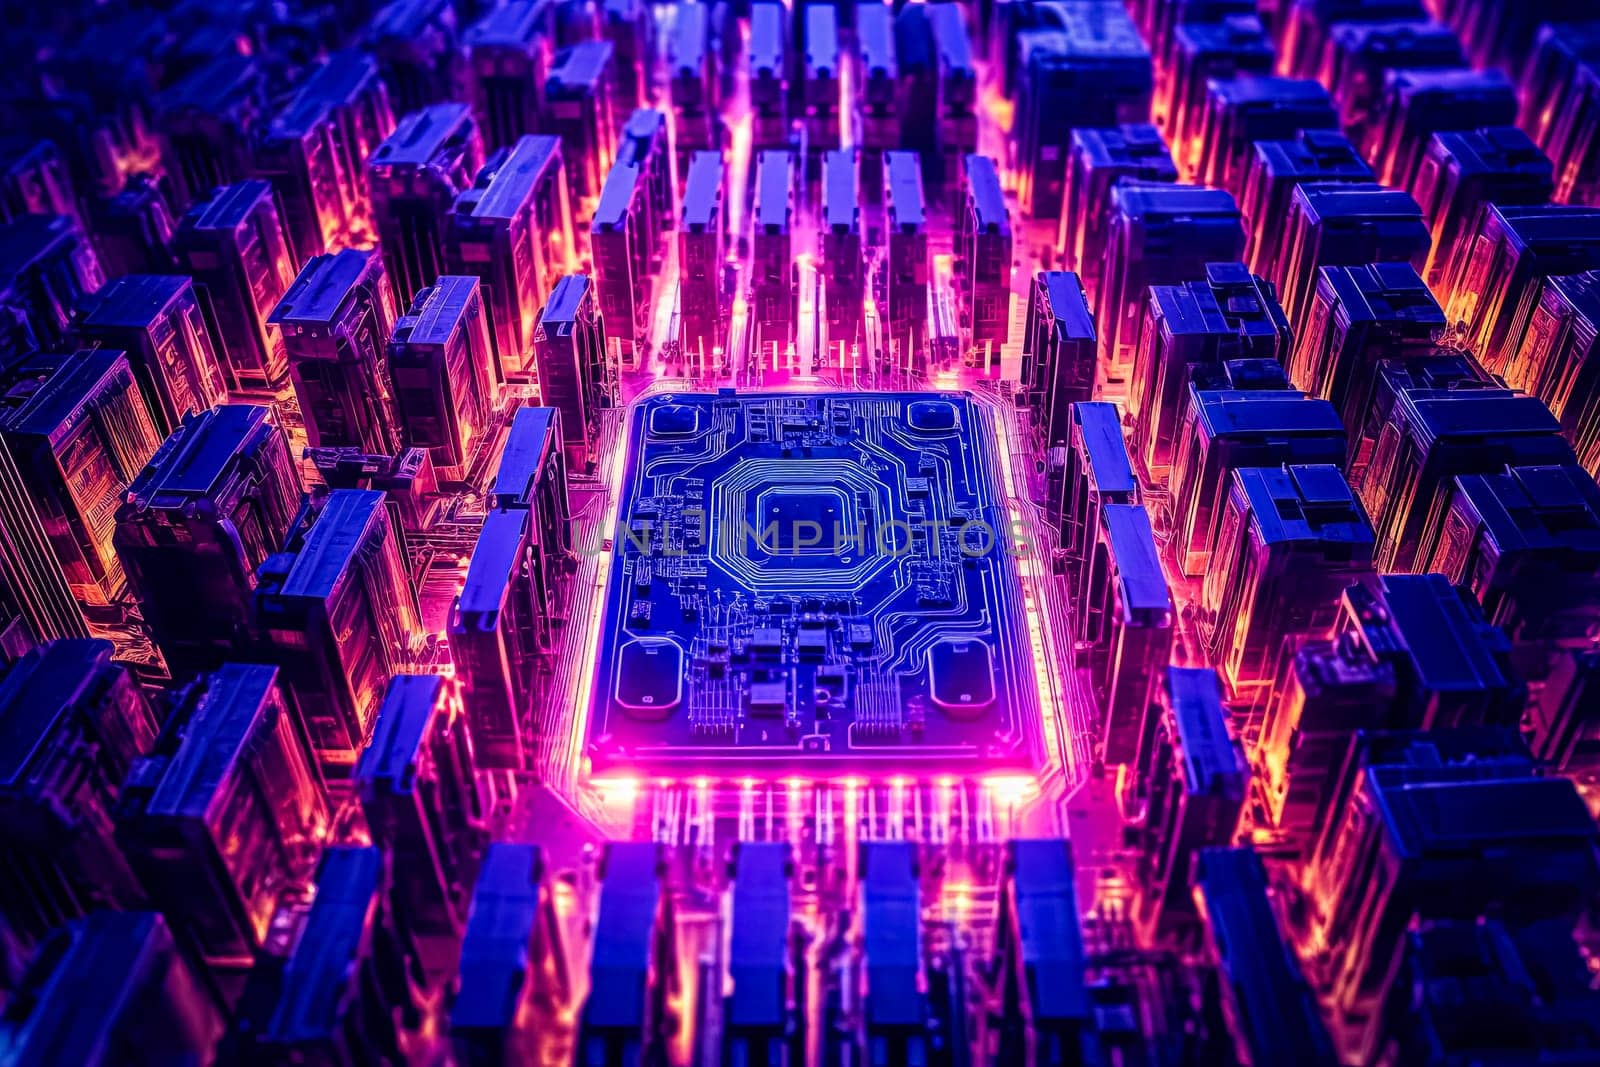 A computer chip is shown in a blue and purple color scheme. The chip is surrounded by a blue background and is the main focus of the image. The colors and design of the chip give off a futuristic